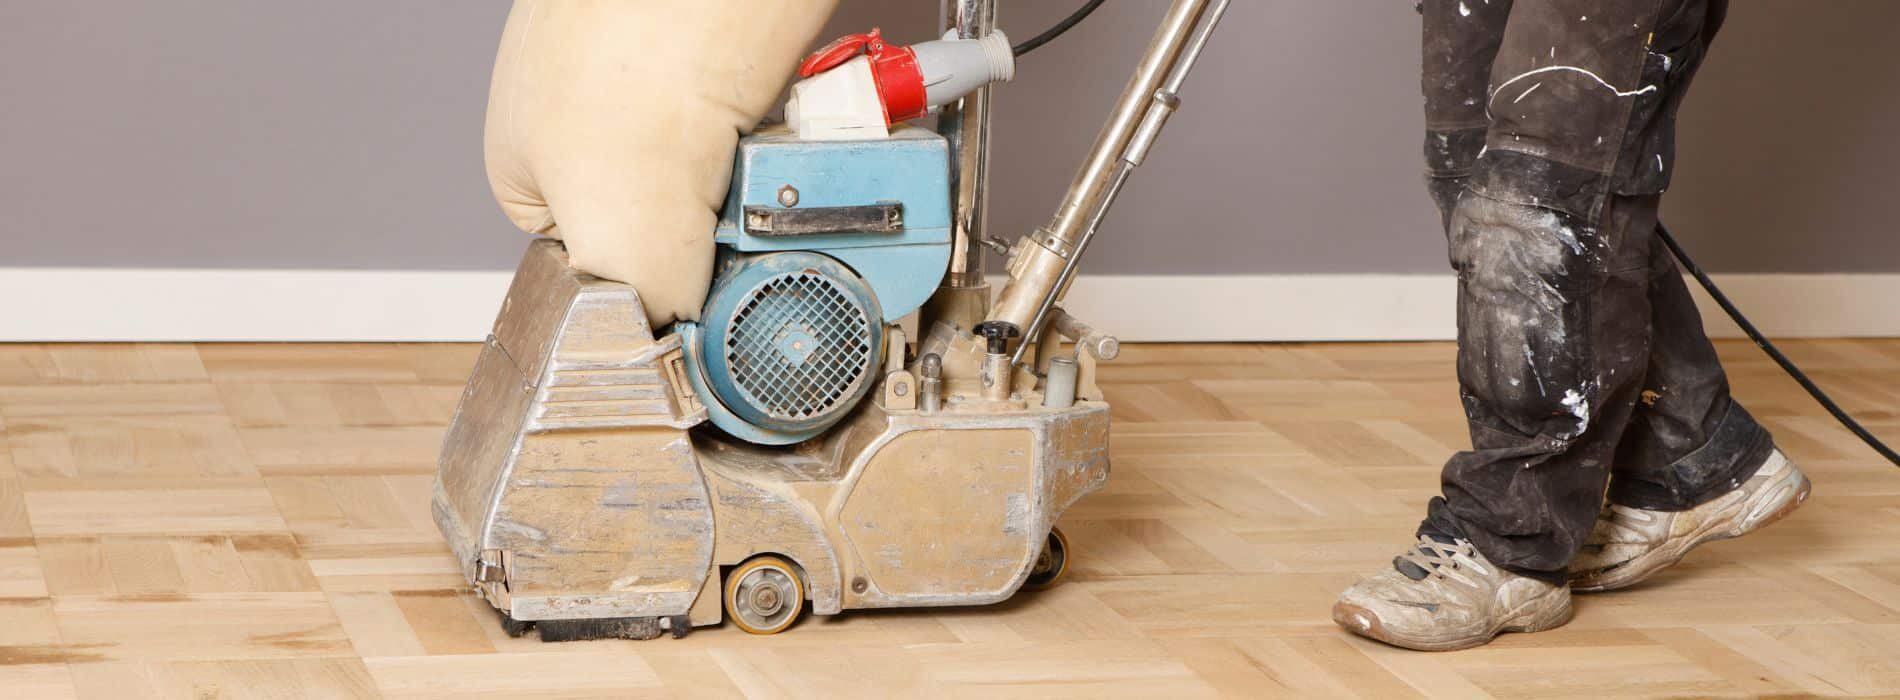 In Cambridgeshire, Mr Sander® using a Orebro Belt sander to sand a parquet floor. The machine runs on 2.4 kW of power and requires a voltage of 230 V with a frequency of 50 Hz/60 Hz. The sander has a size of 250x750 mm and is connected to a dust extraction system that includes a HEPA filter, ensuring a clean and efficient sanding process.